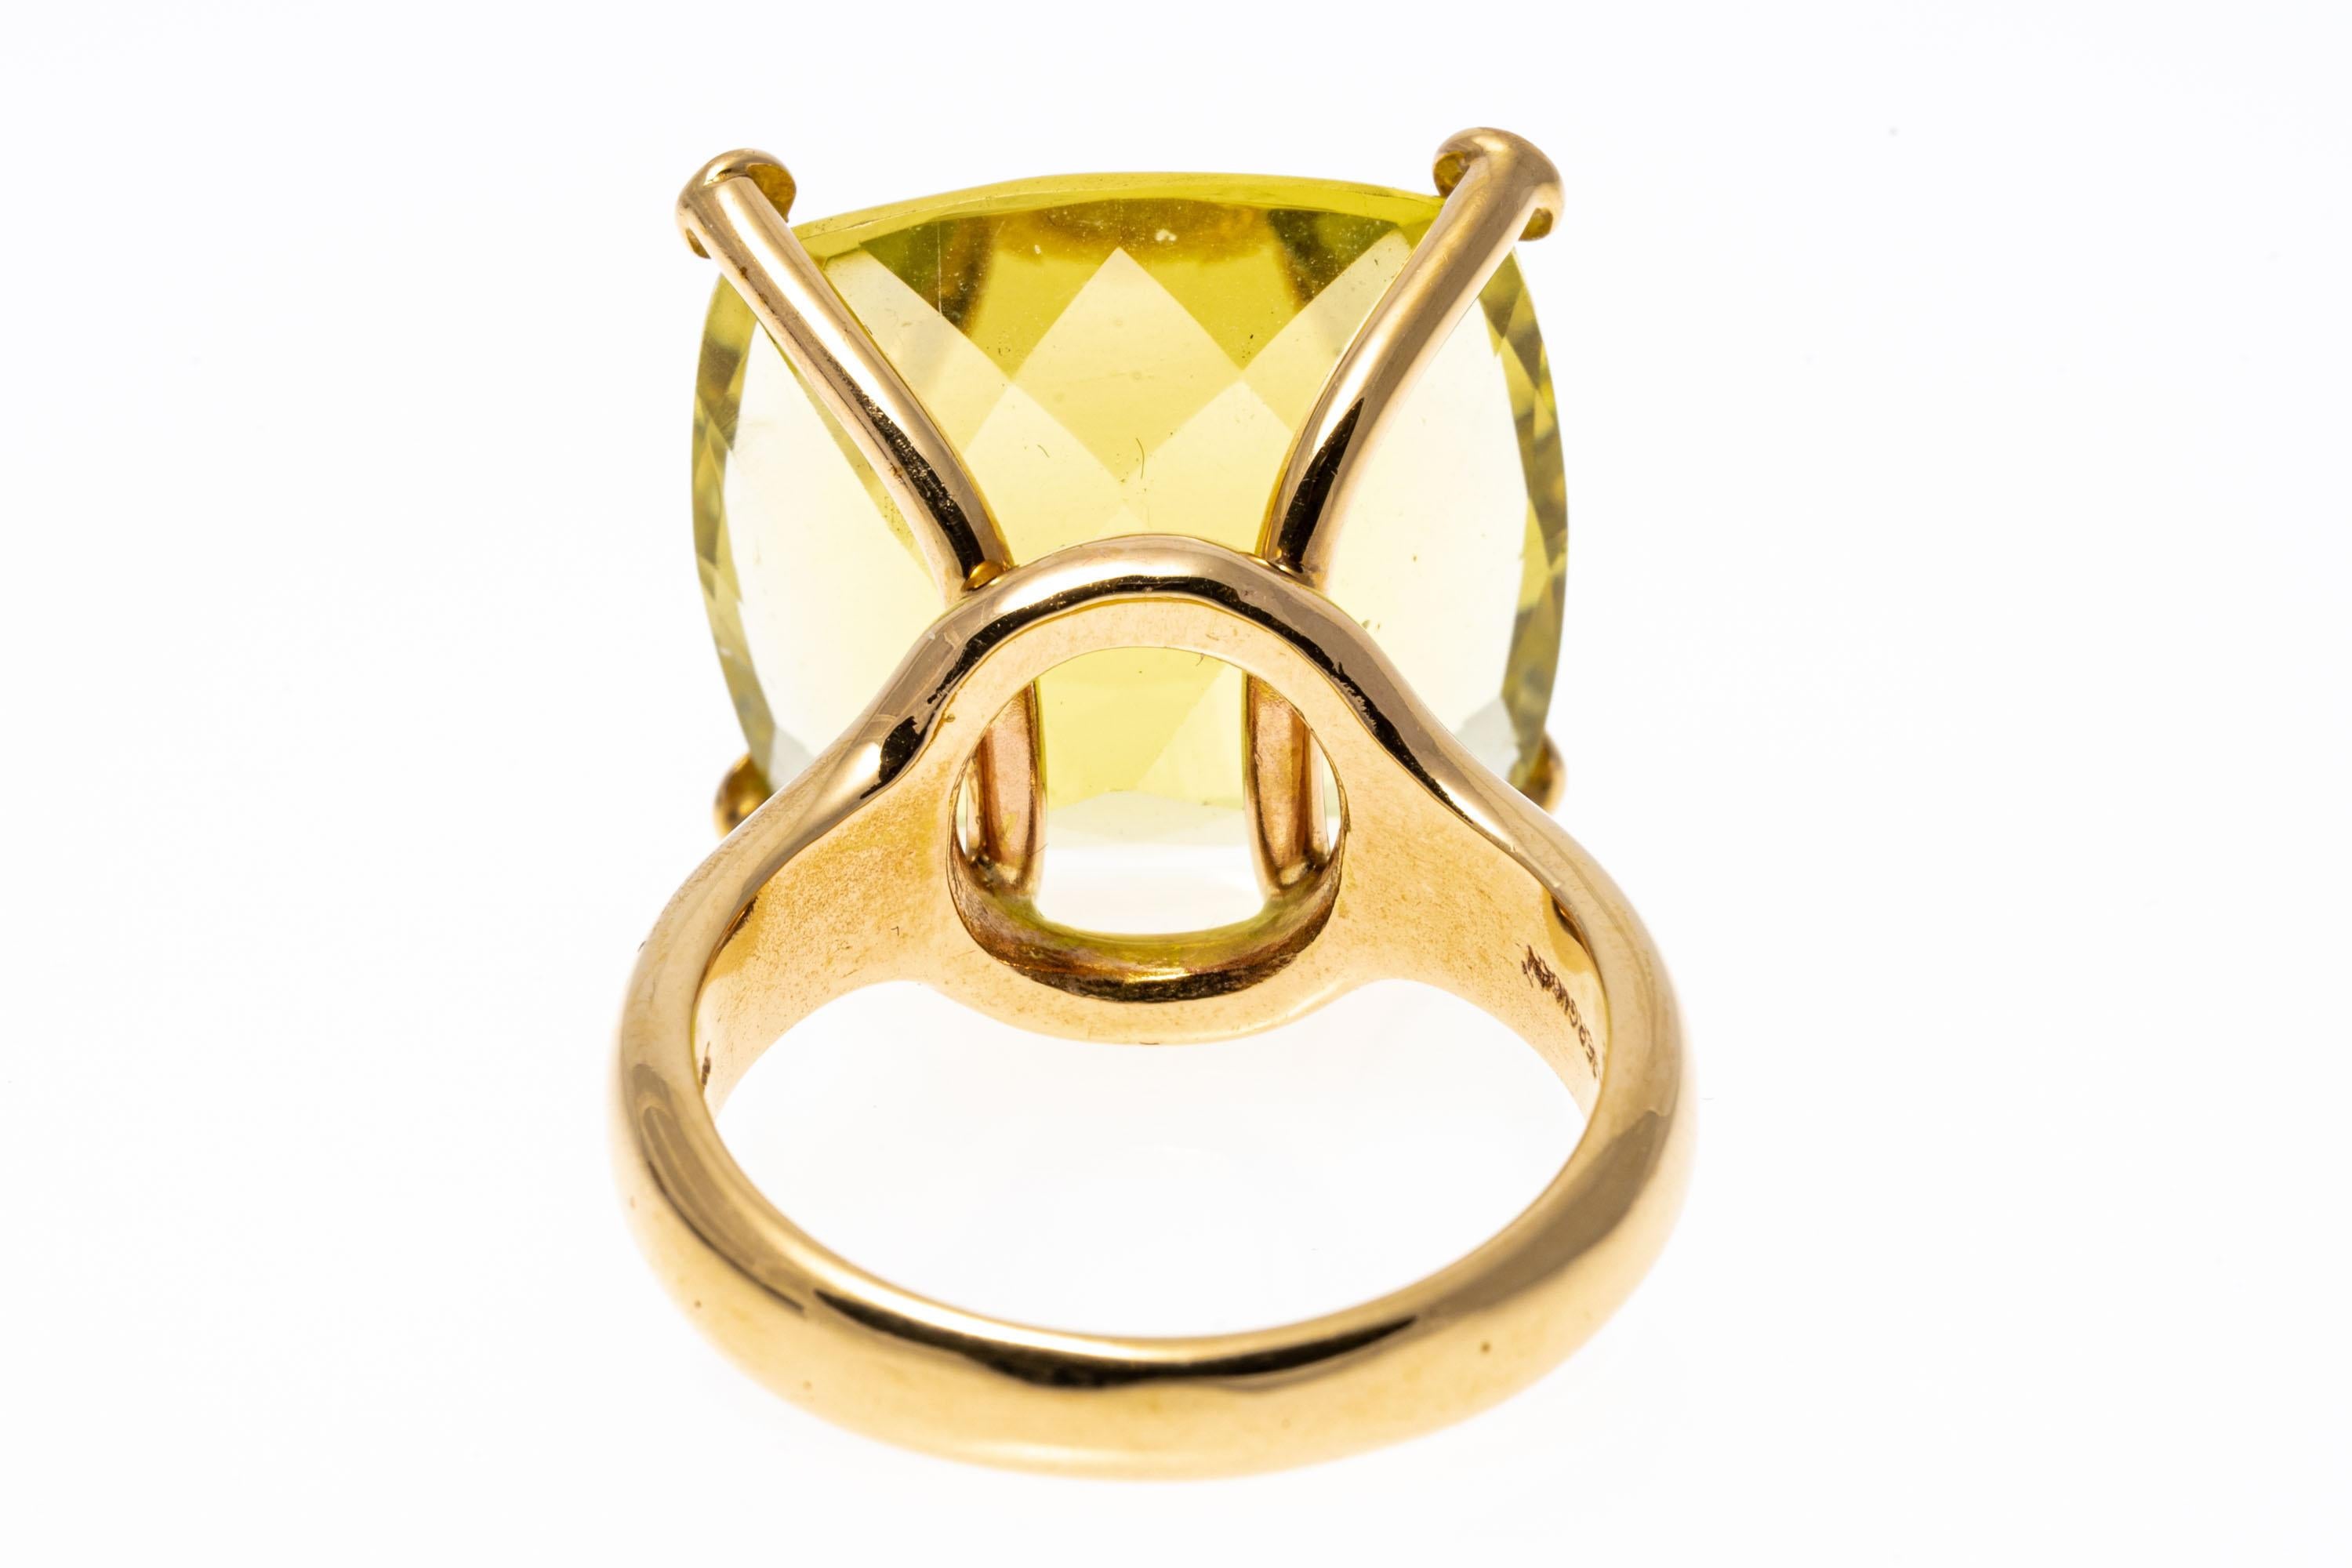 14k yellow gold ring. This gorgeous, contemporary chunky square cushion, solitaire lemon lime citrine, approximately 21.41 CTS, set with decorative prongs atop a wide, high polished shank.
Marks: 14k
Dimensions: 11/16